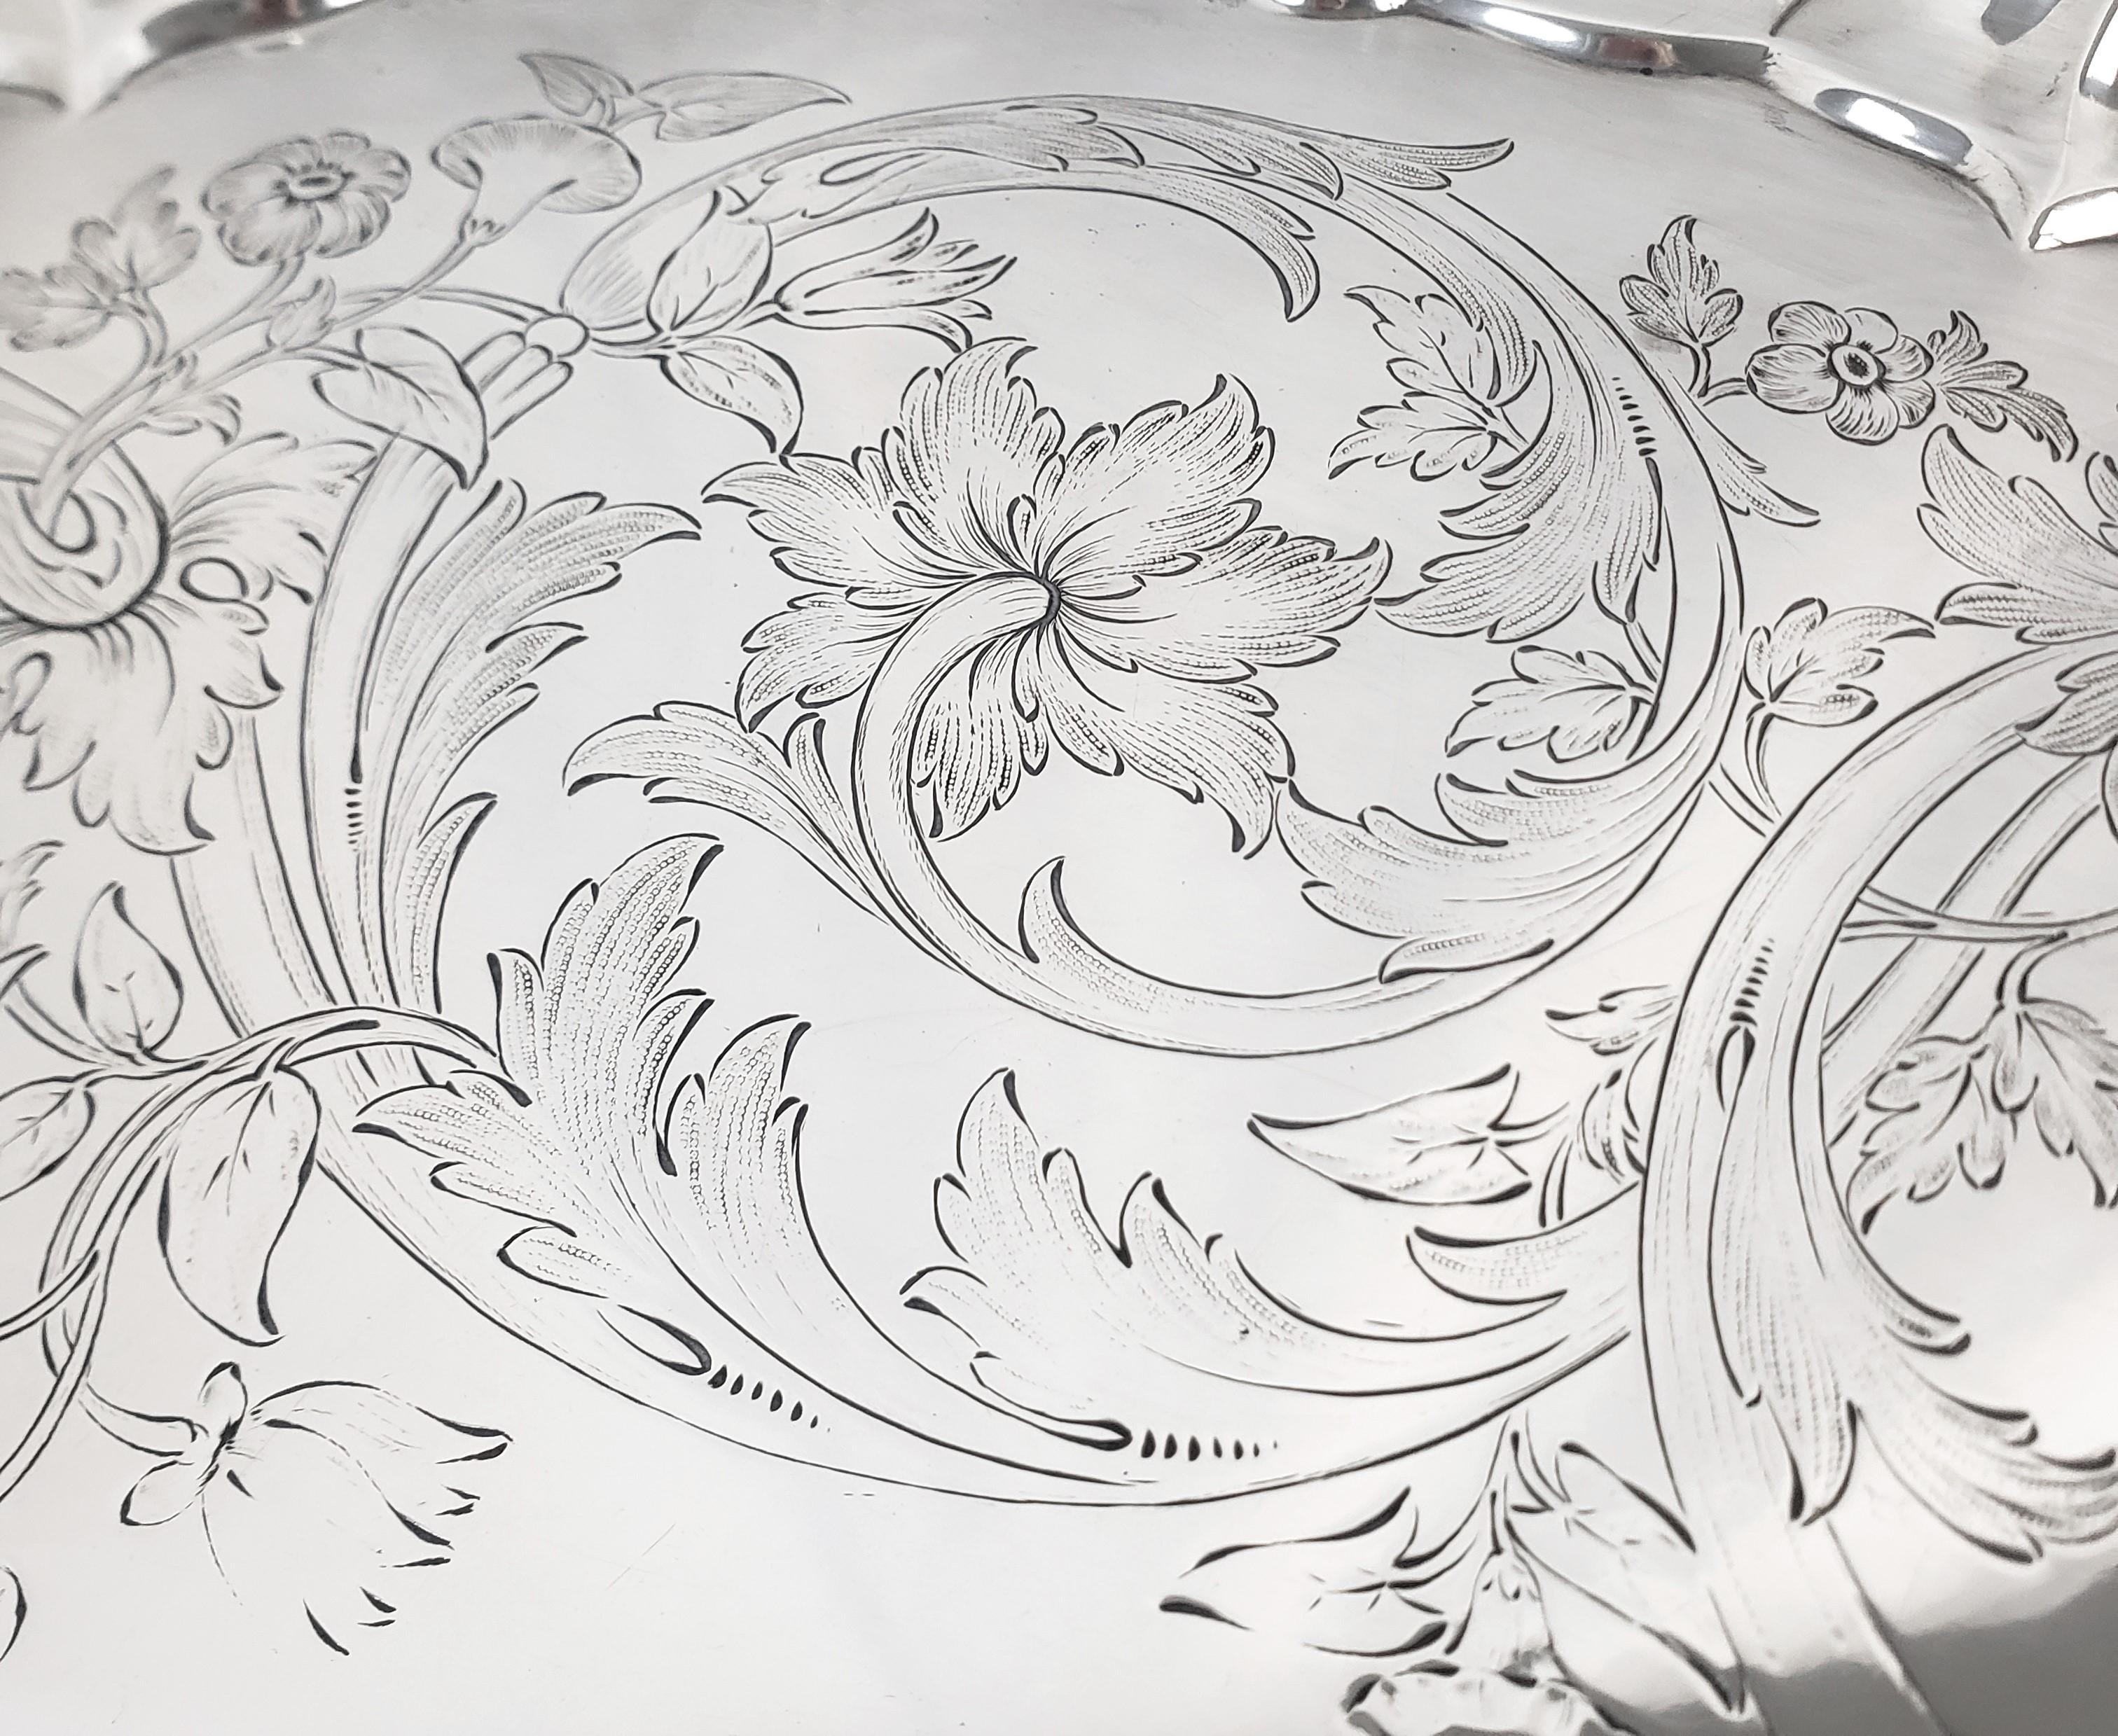 Huge Antique Sterling Silver Salver or Footed Tray with Ornate Floral Engraving For Sale 2